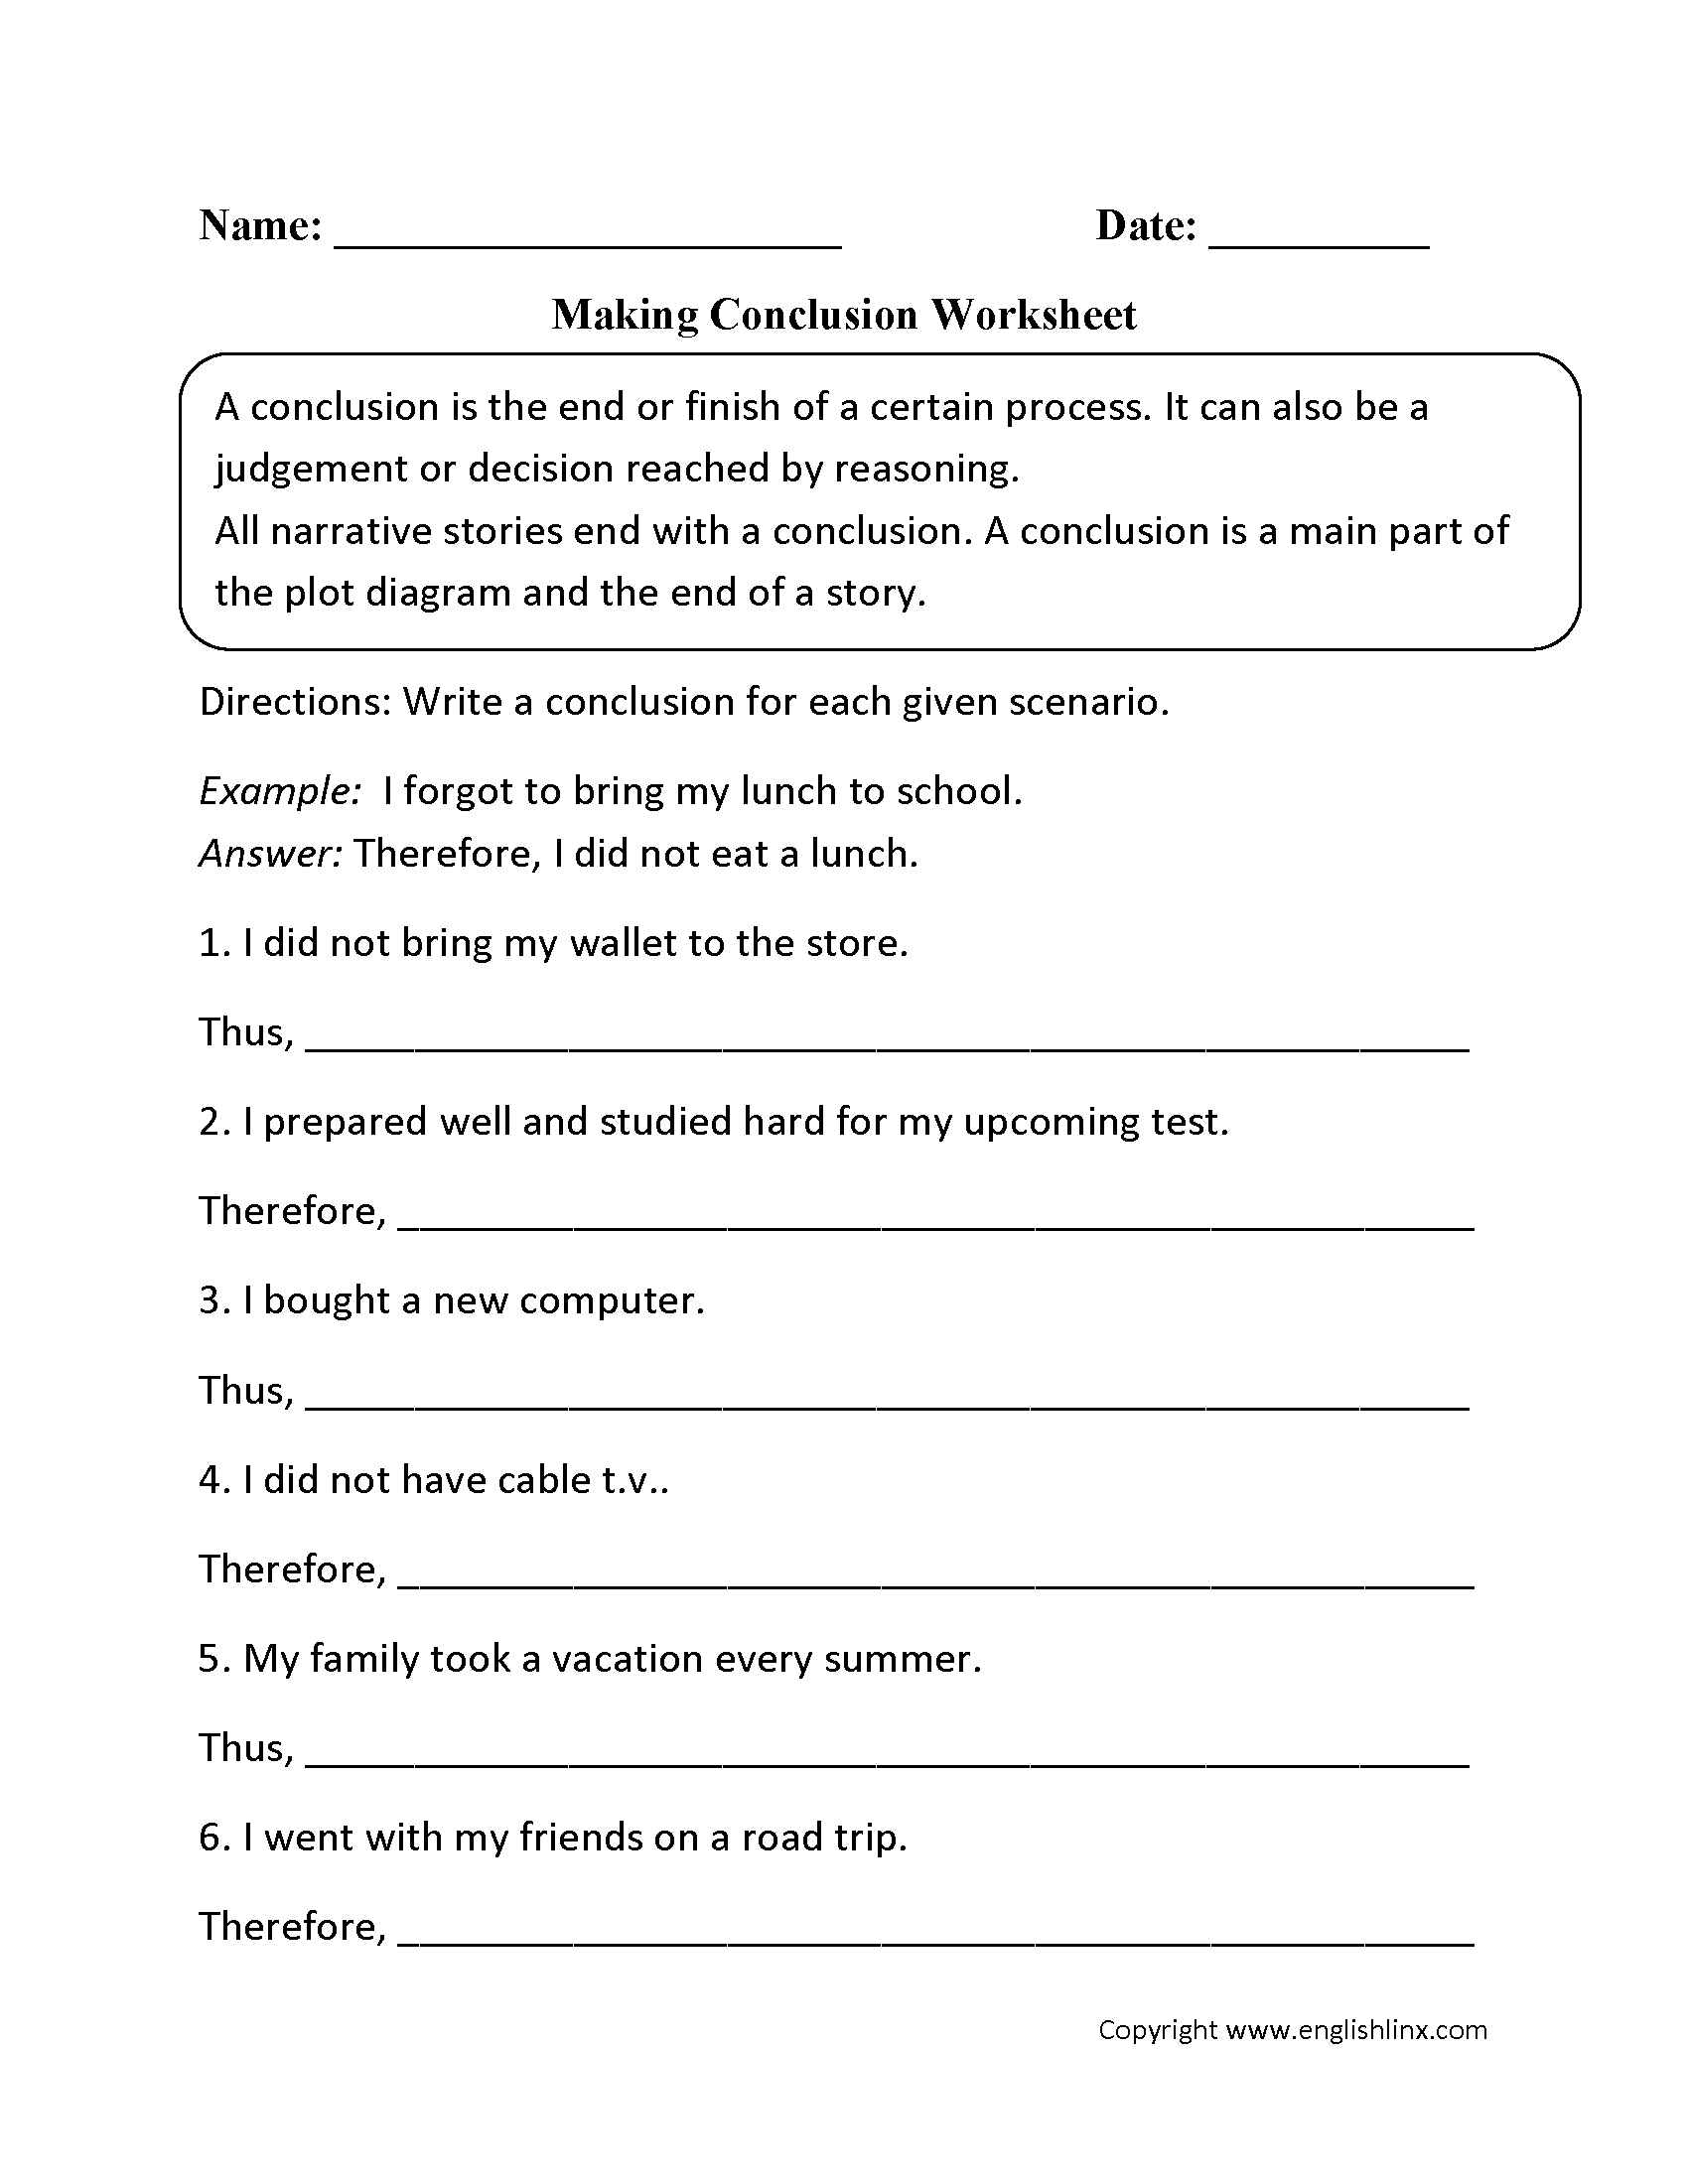 Writing a conclusion for informational text worksheets